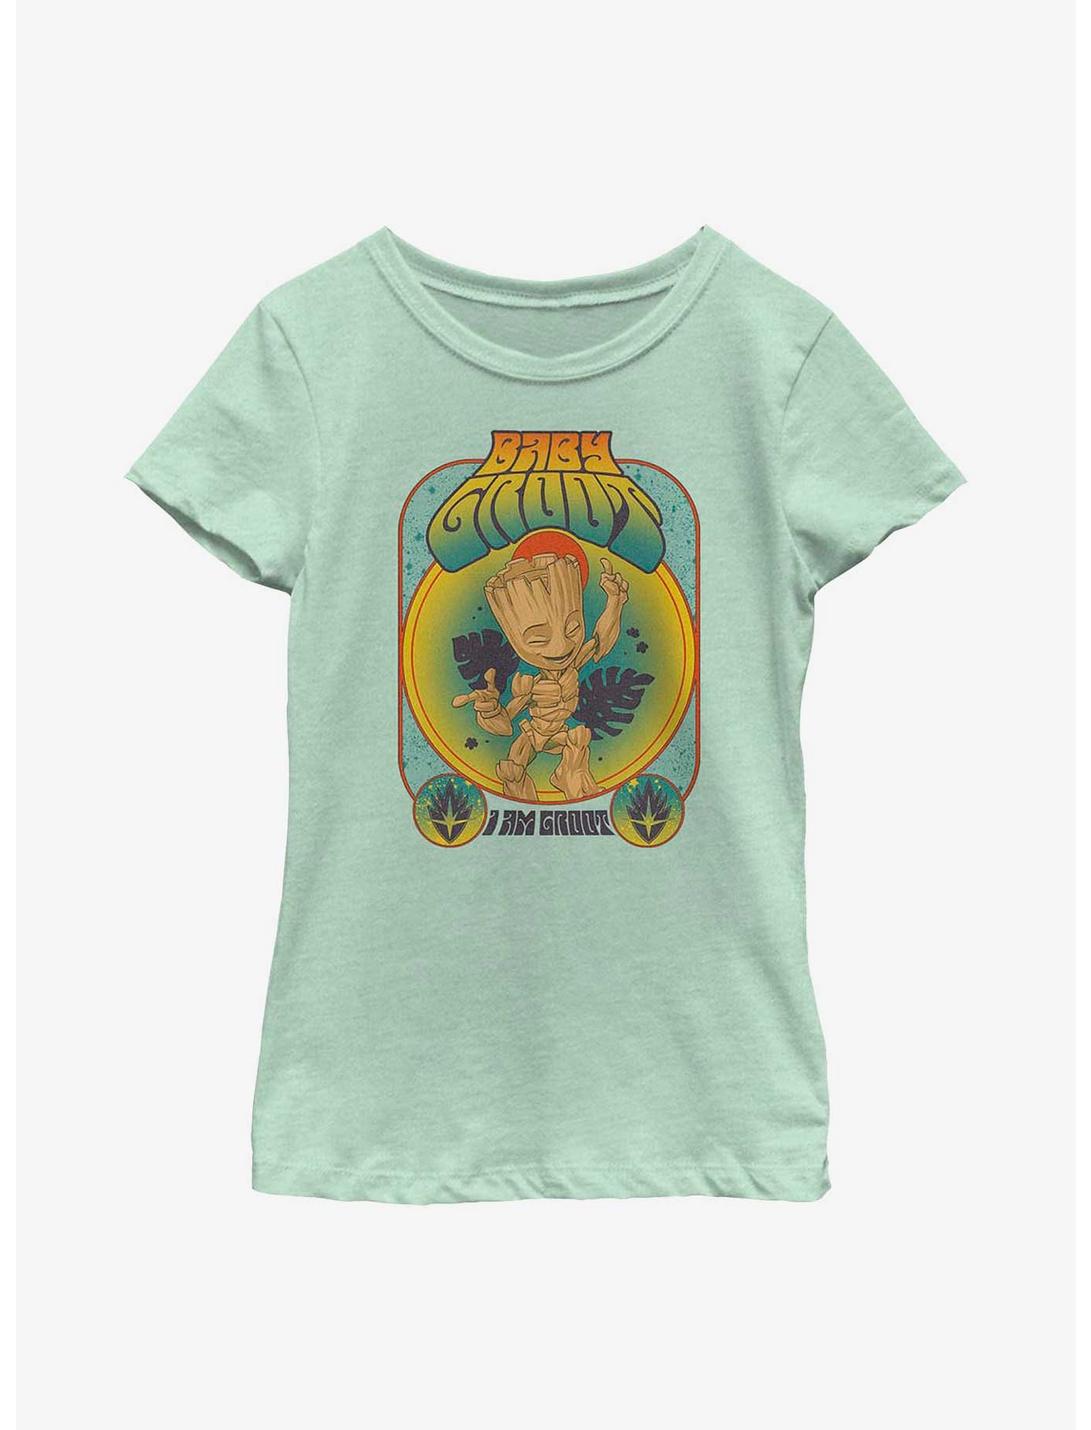 Marvel Guardians Of The Galaxy Baby Groot Youth Girls T-Shirt, MINT, hi-res